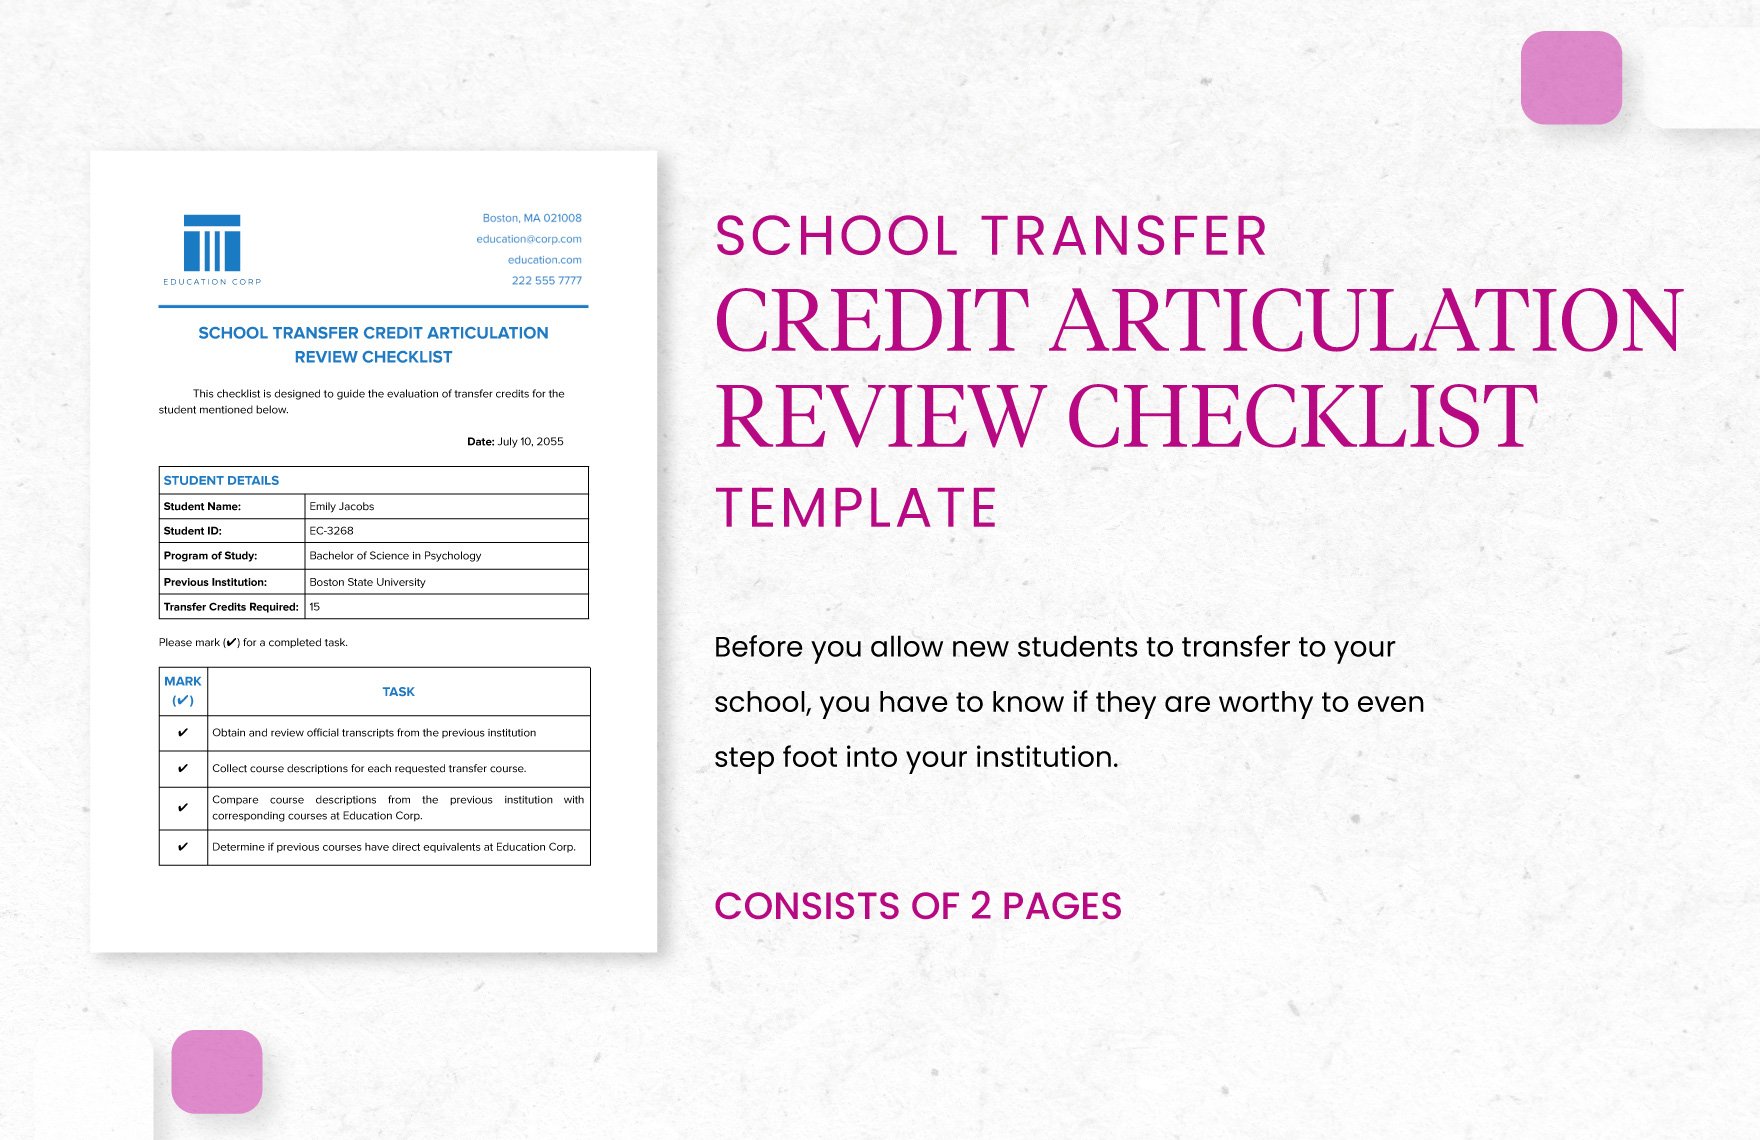 School Transfer Credit Articulation Review Checklist Template